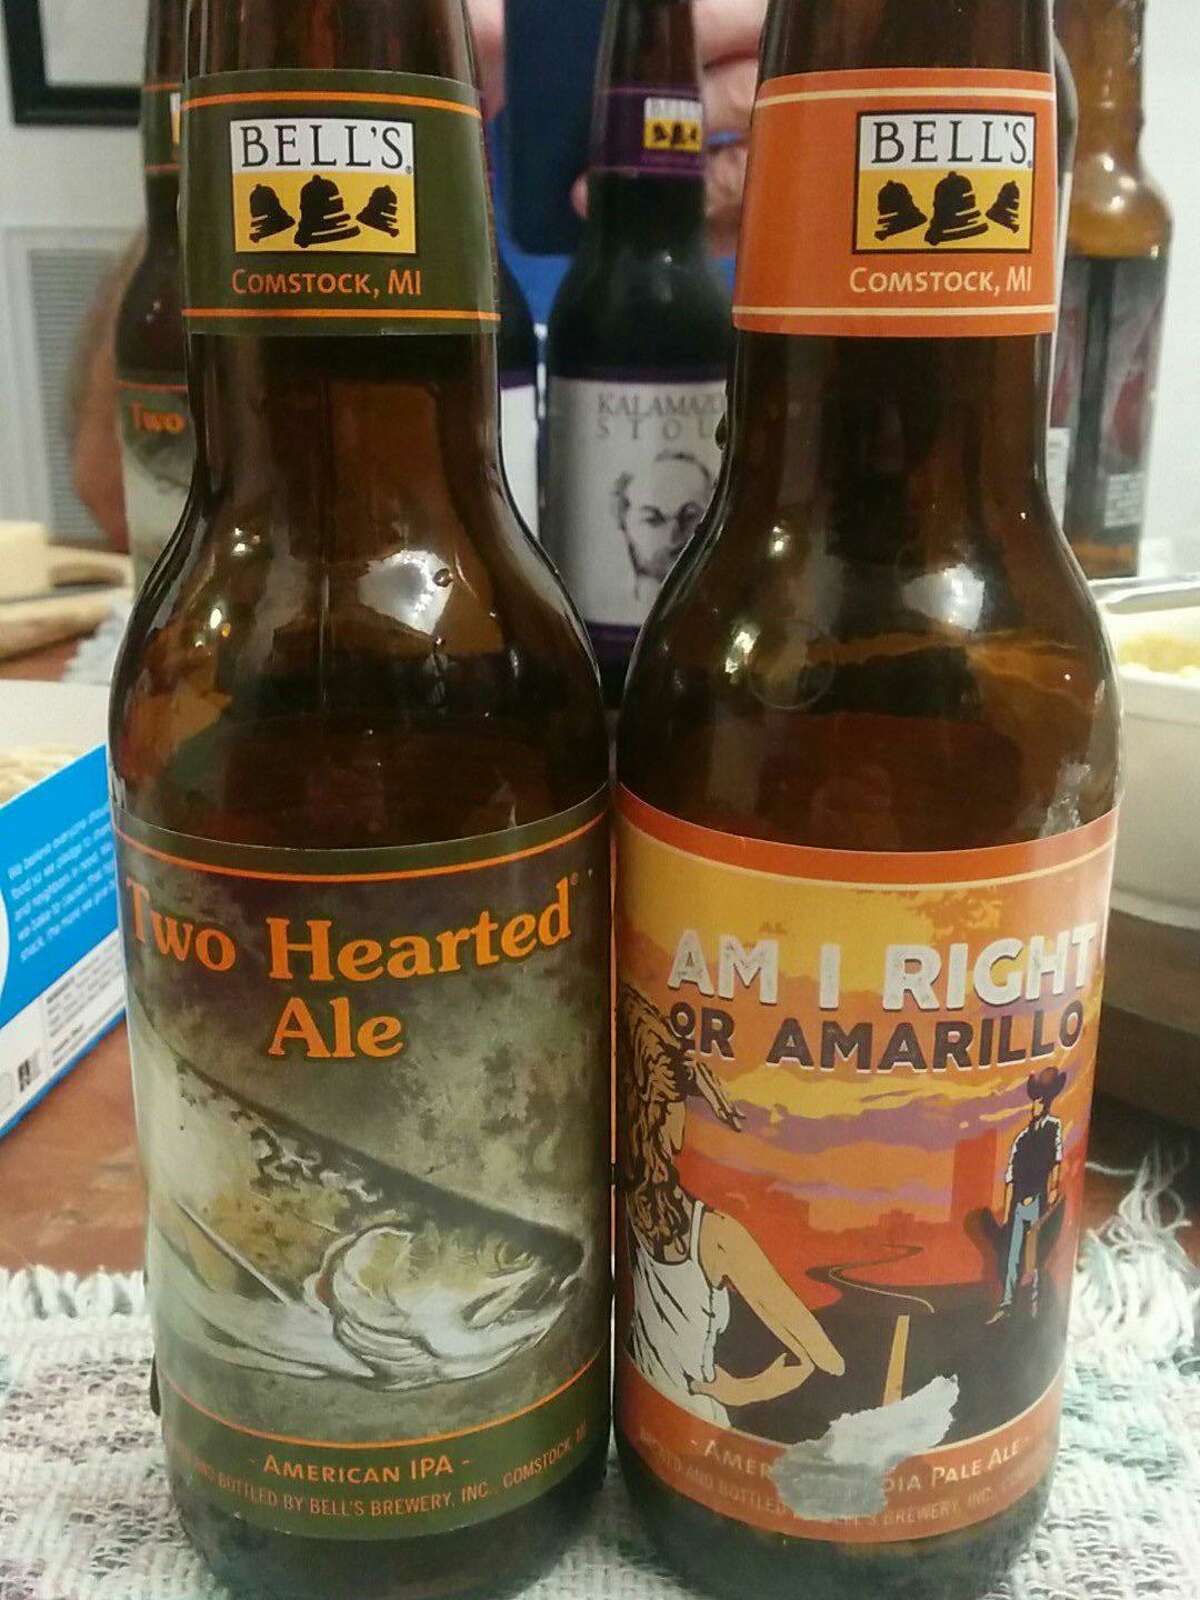 Bell's Brewery is debuting in the San Antonio area with two IPAs. The Two Hearted Ale is a classic American-style IPA, and the Am I Right or Amarillo is a special release made for its debut in the Texas market.